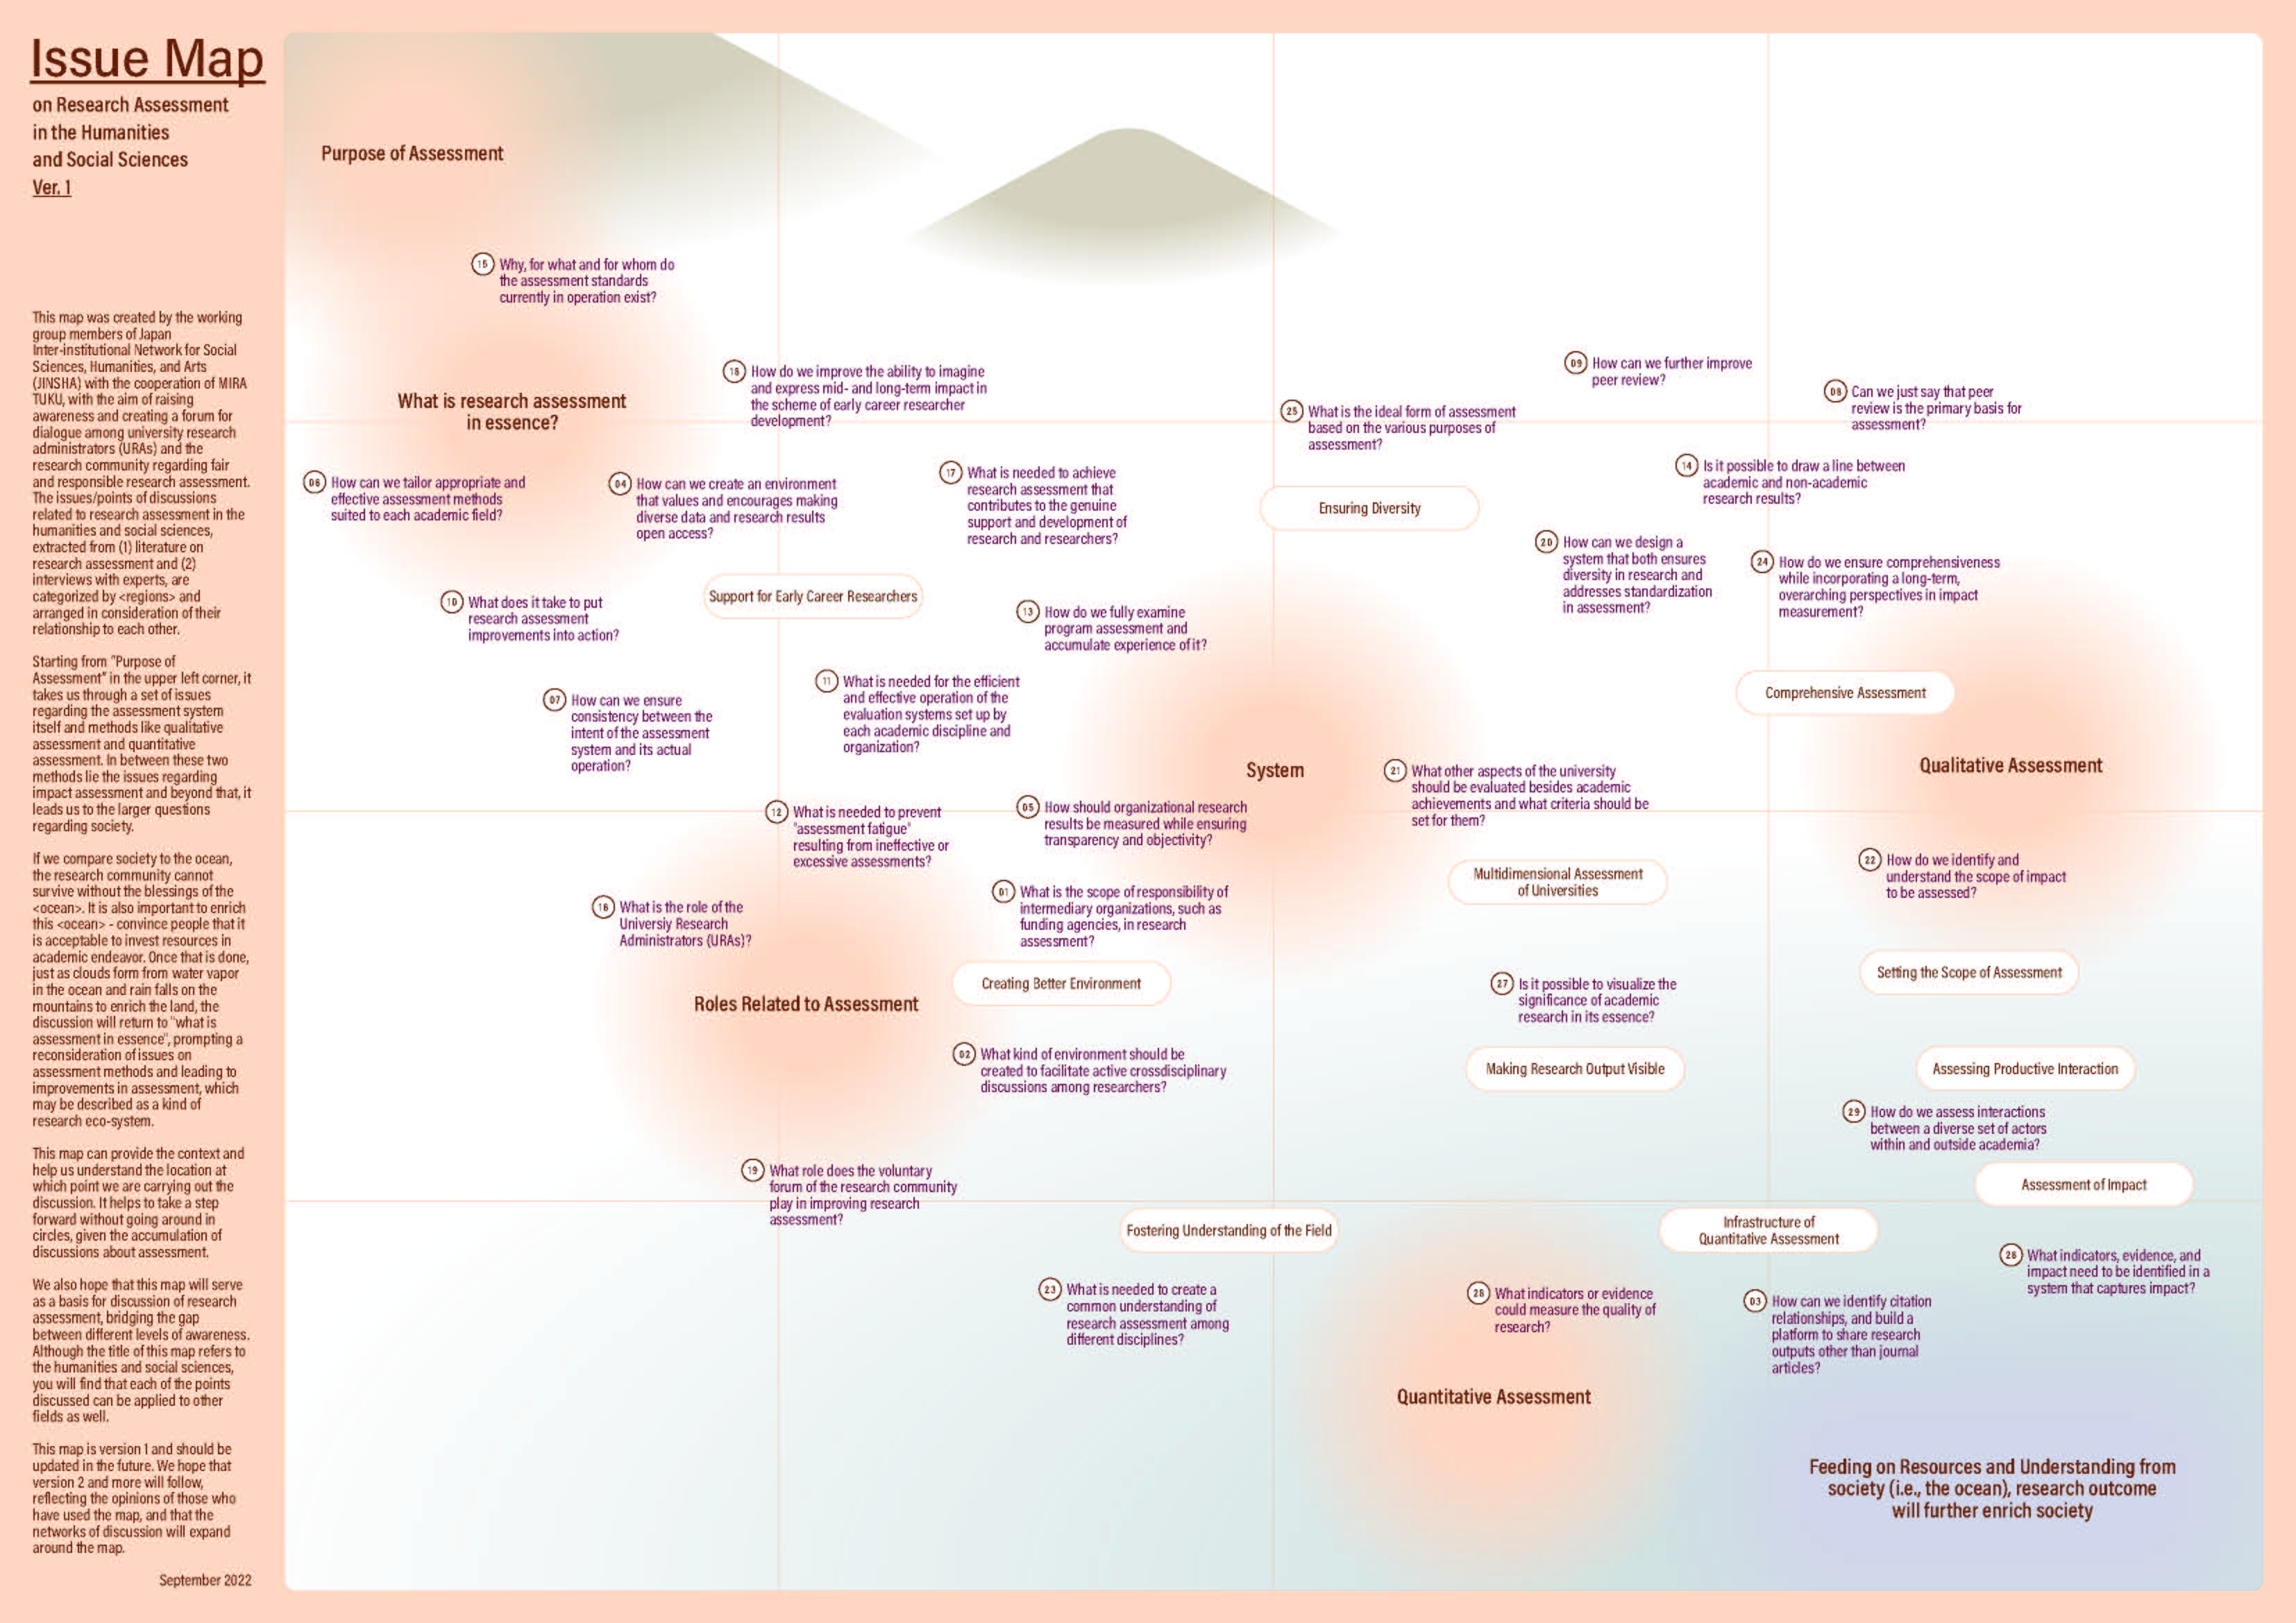 Issue Map on Research Assessment in the Humanities and Social Sciences Ver.1